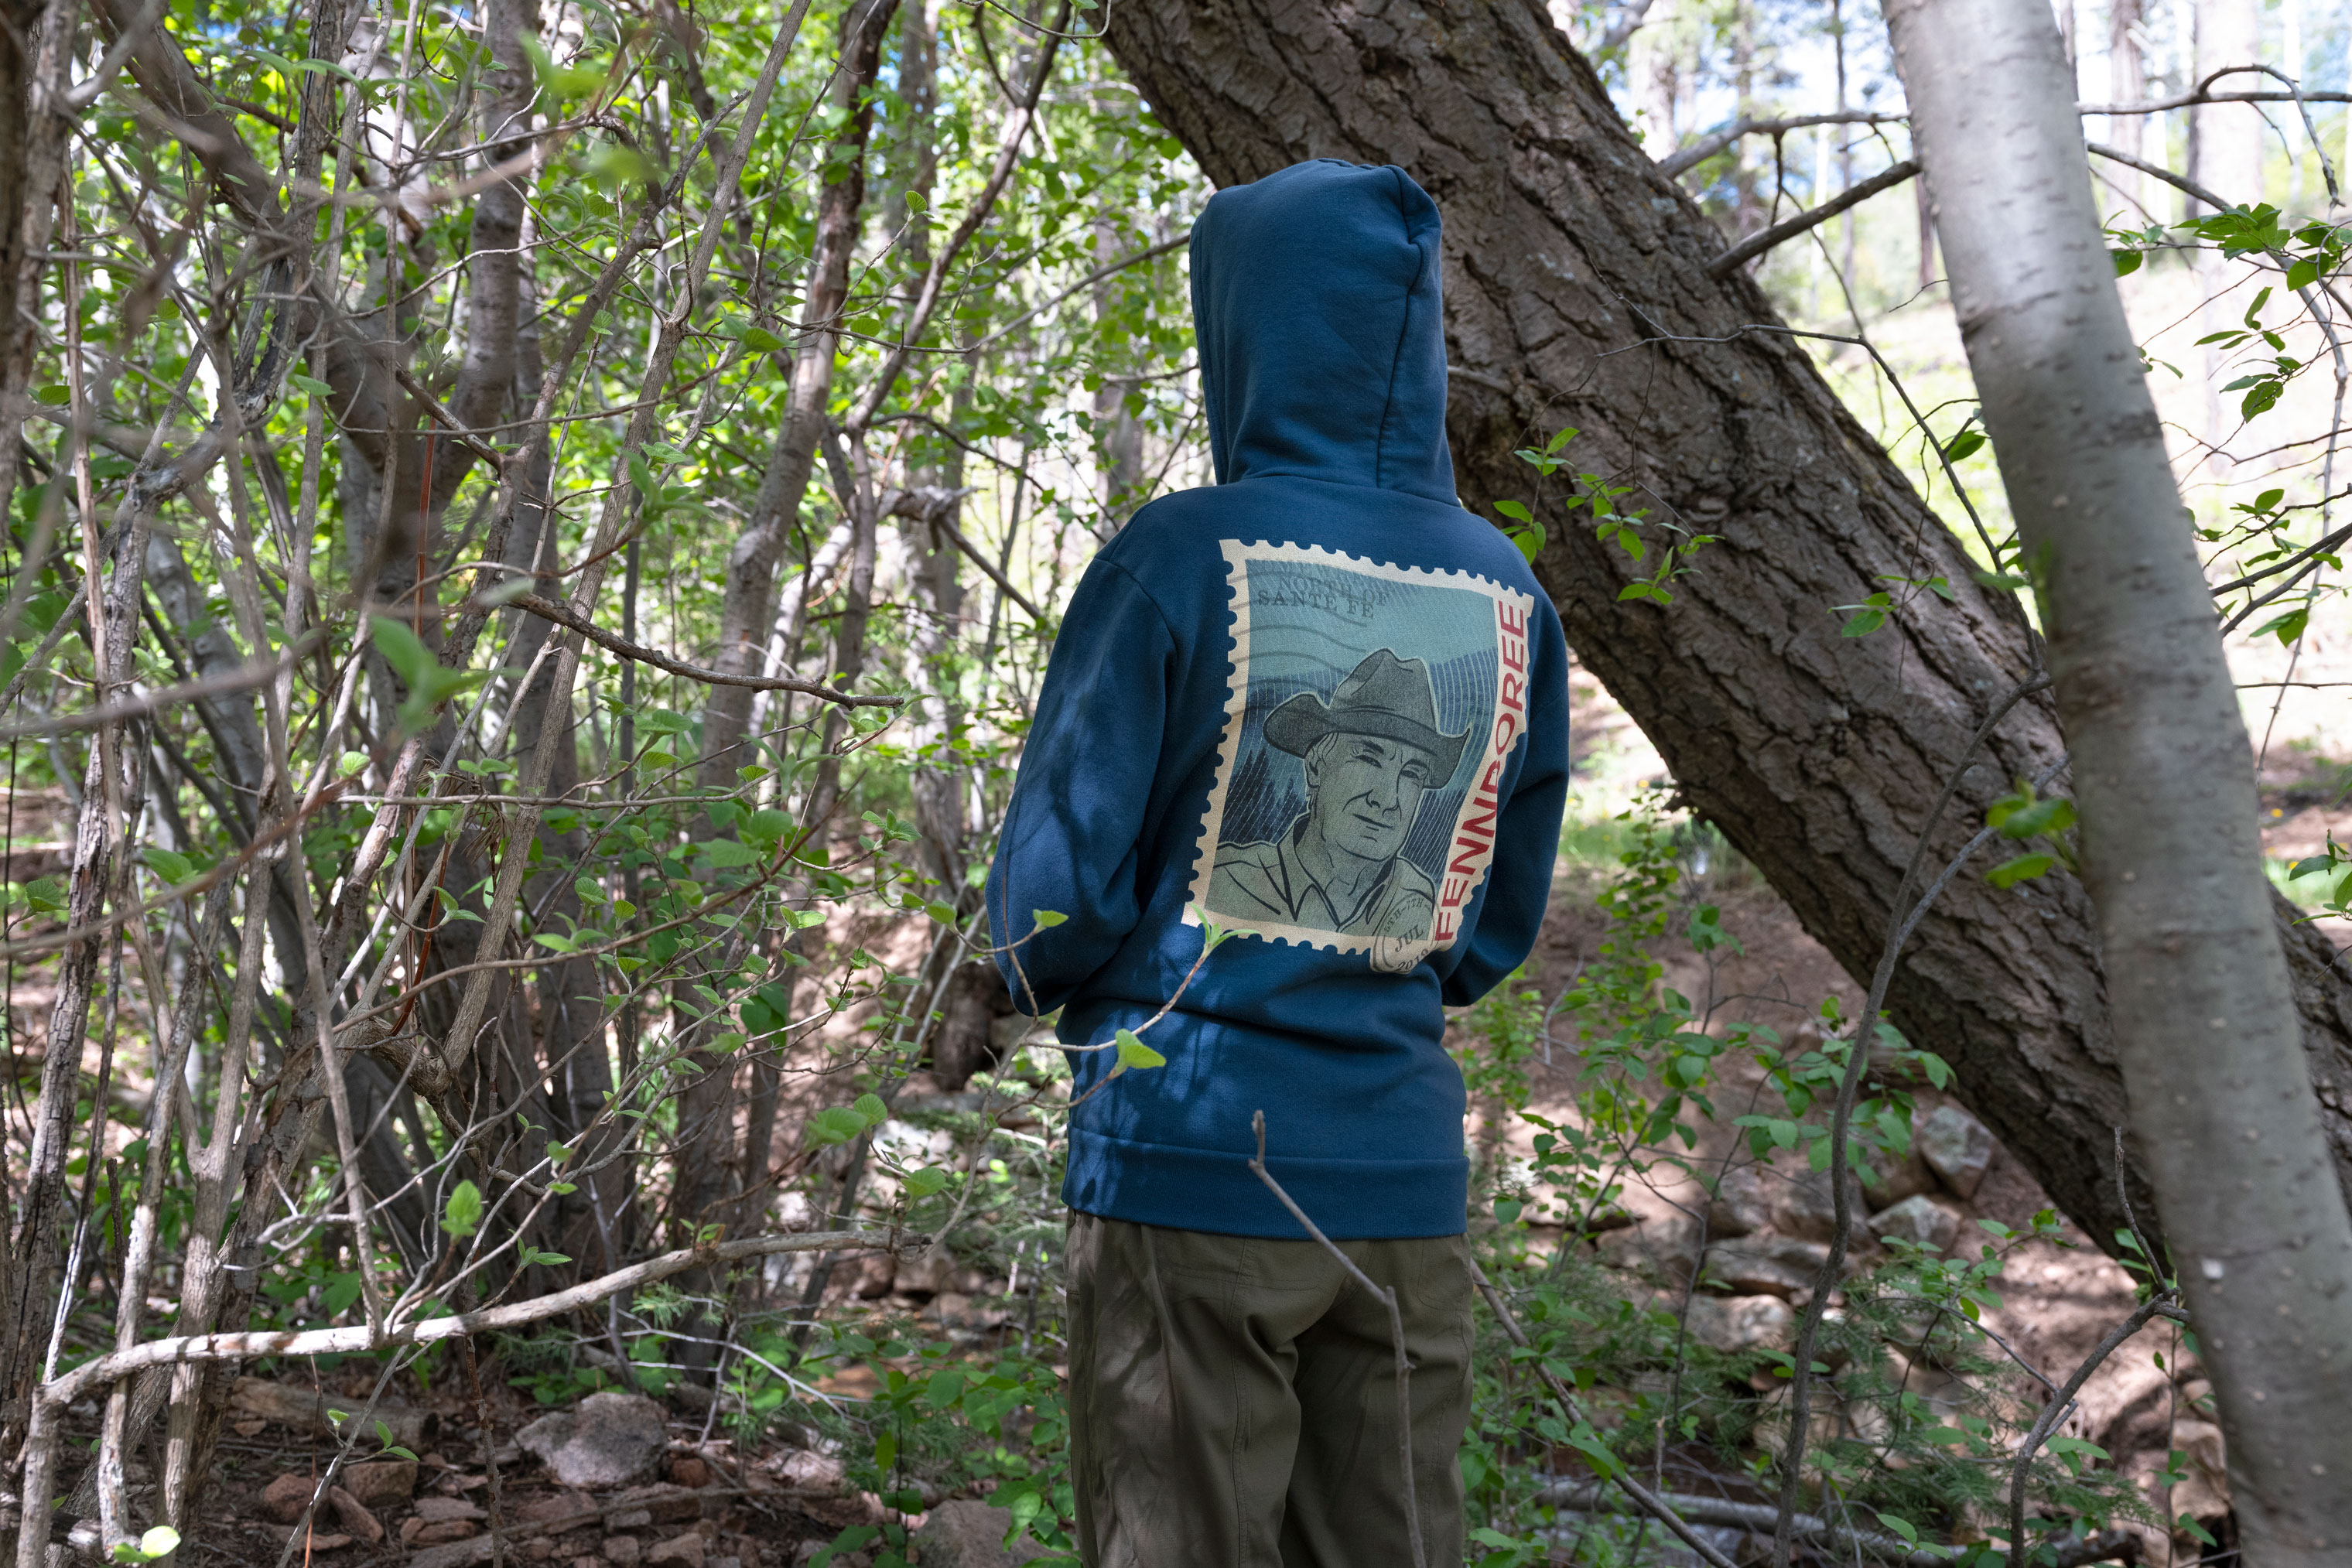 Sacha Johnston wearing her Fennboree sweatshirt in Hyde Park in the Santa Fe National Forest, May 28, 2019.